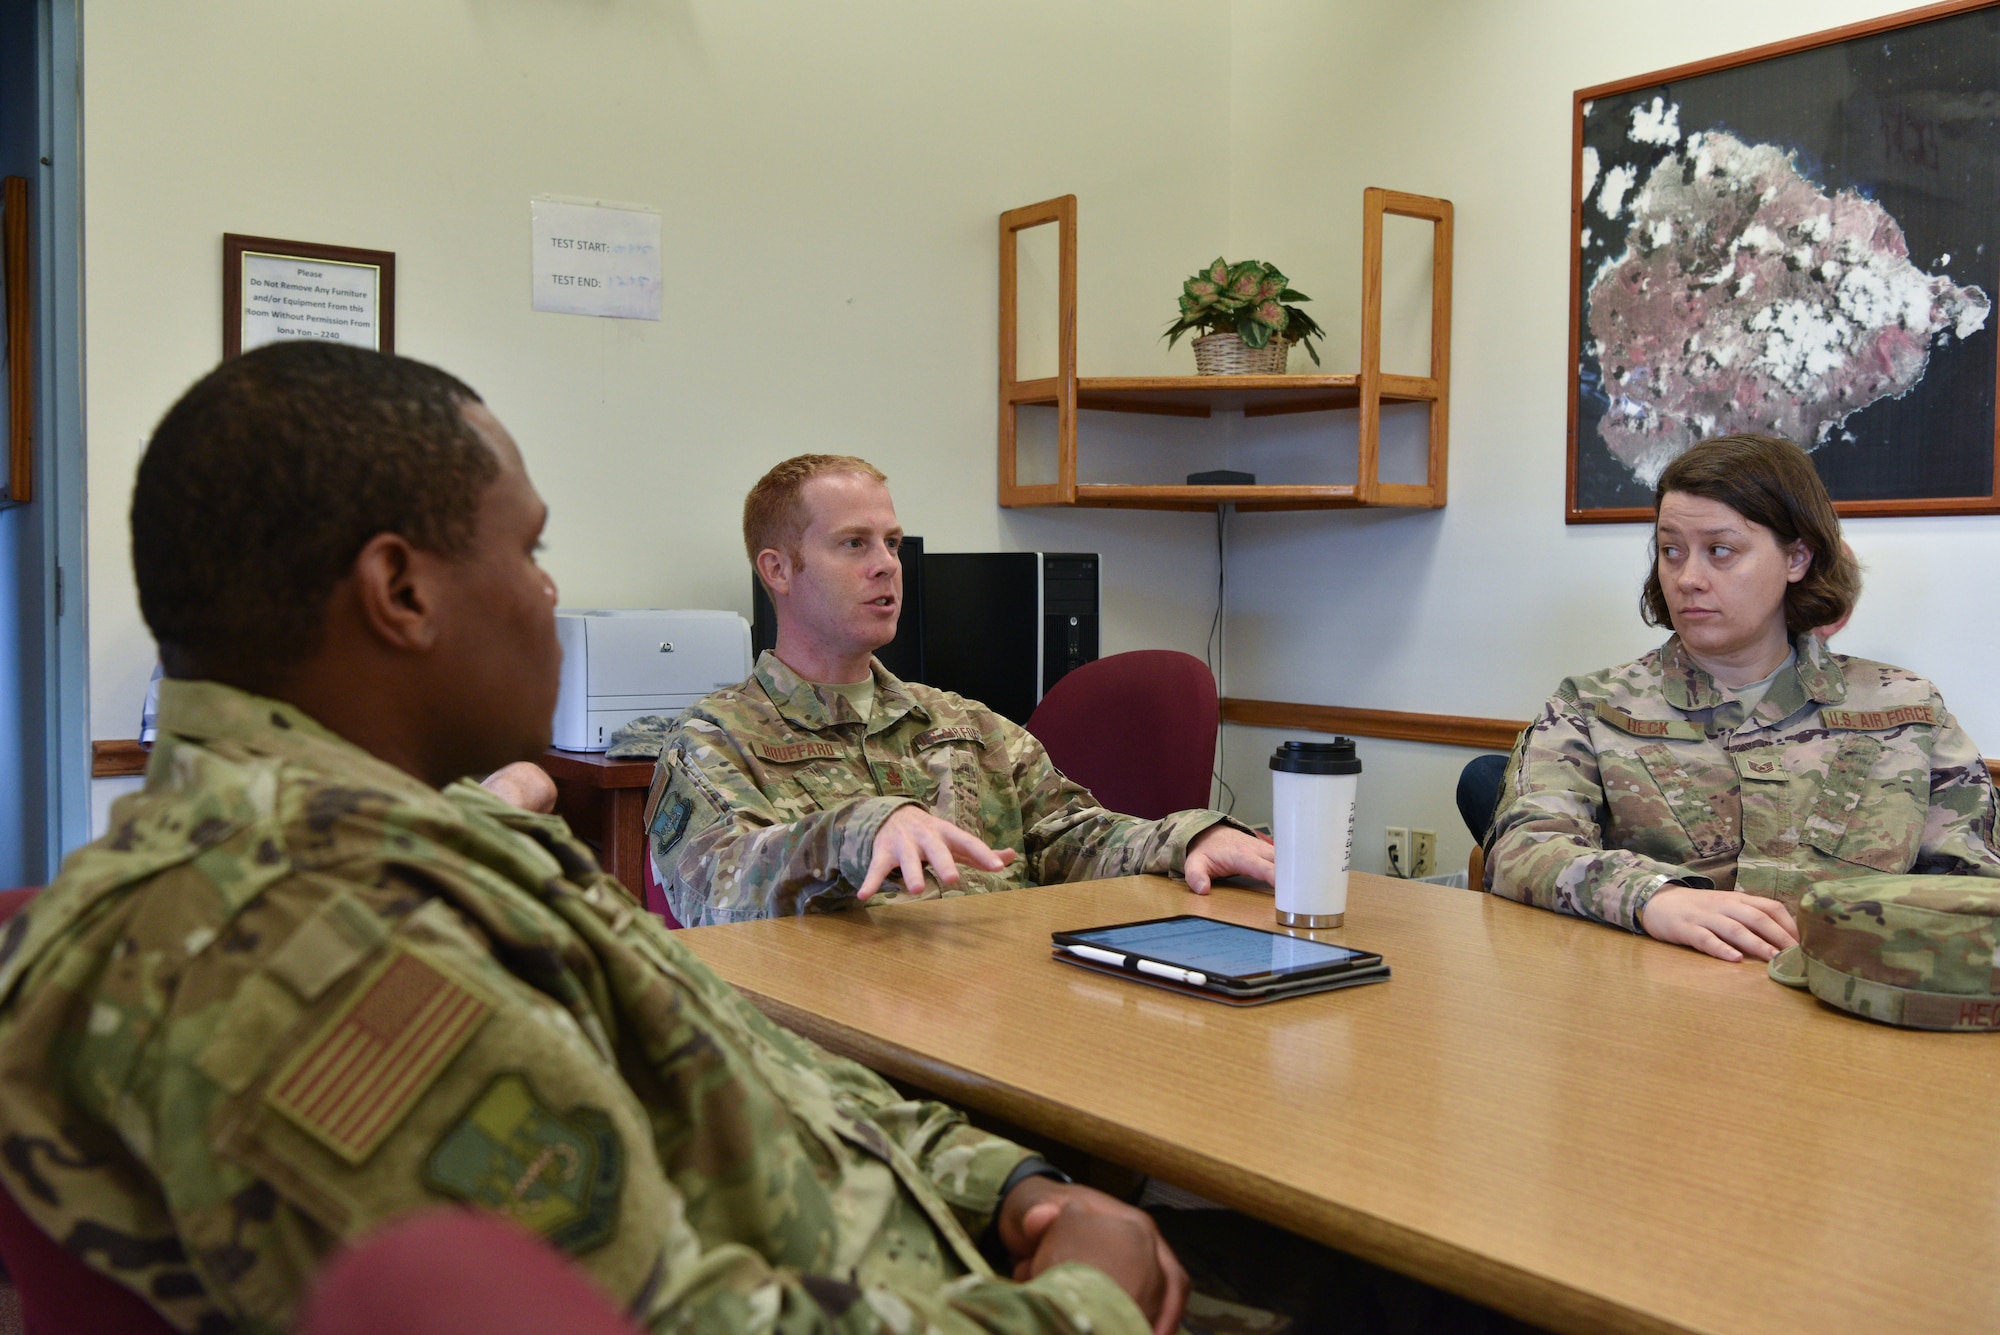 45th Mission Support Group, Detachment 2, holds an meeting, January 14, 2019 at Ascension Island Auxiliary Airfield. Det 2 works with various organizations including the Royal Air Force and Air Force Technical Applications Center. (U.S. Air Force photo by Airman 1st Class Dalton Williams)